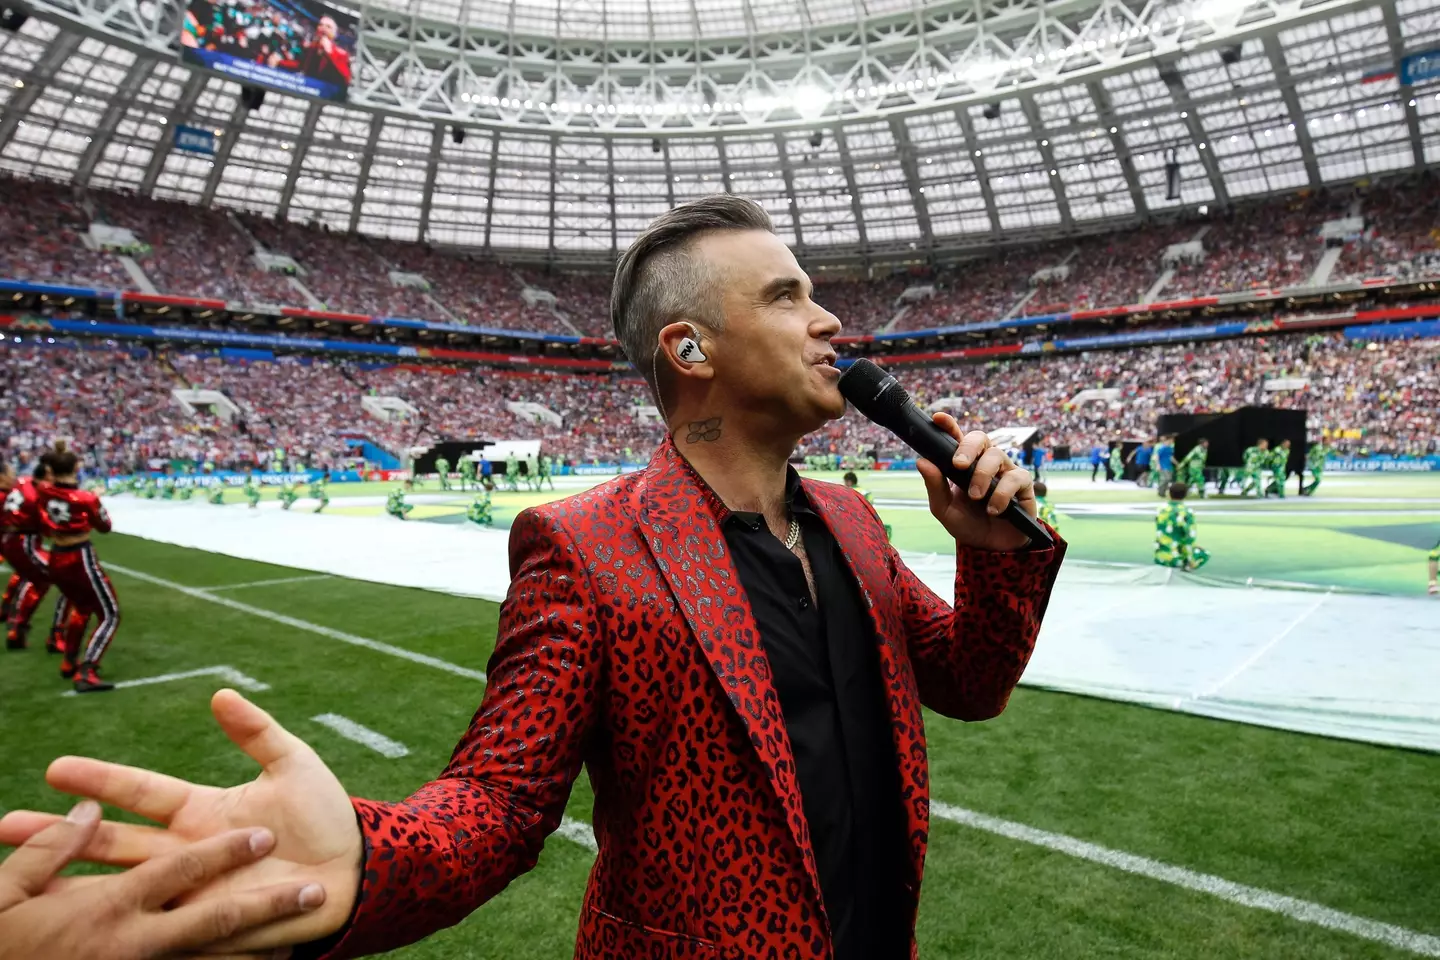 Robbie Williams performing in Russia in 2018.